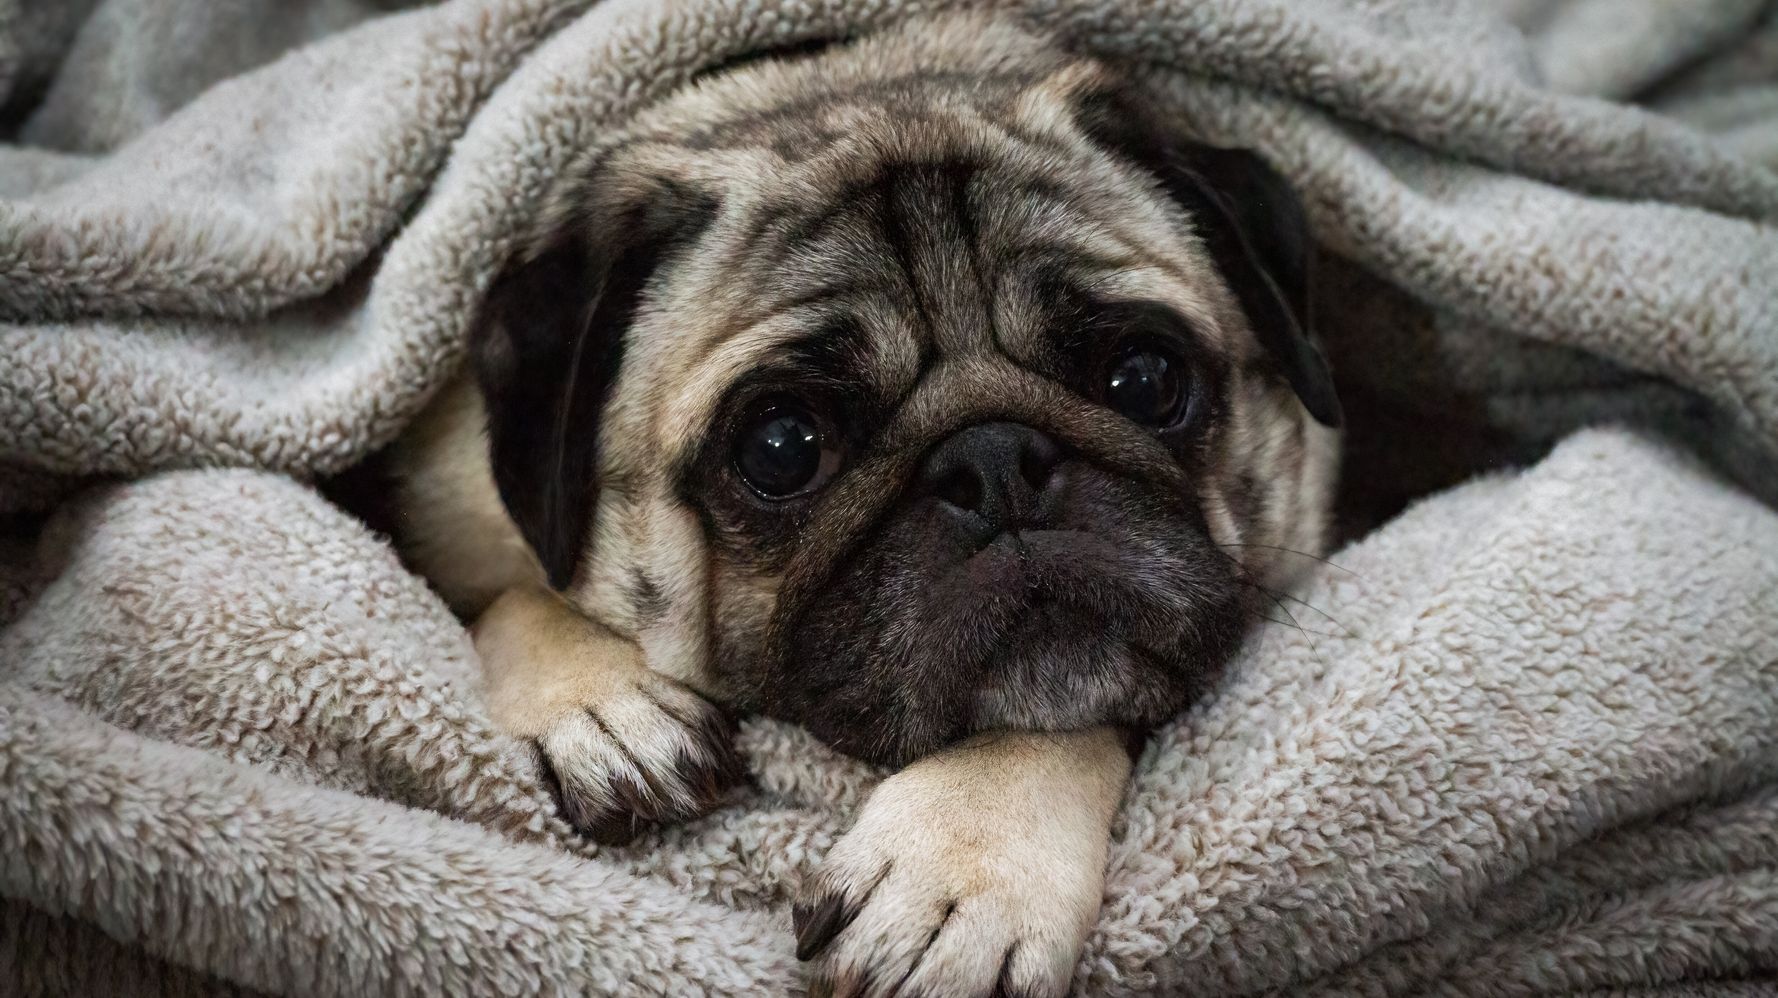 Pugs Can't Be Considered 'A Typical Dog' Due To Serious Health Issues, Study Says